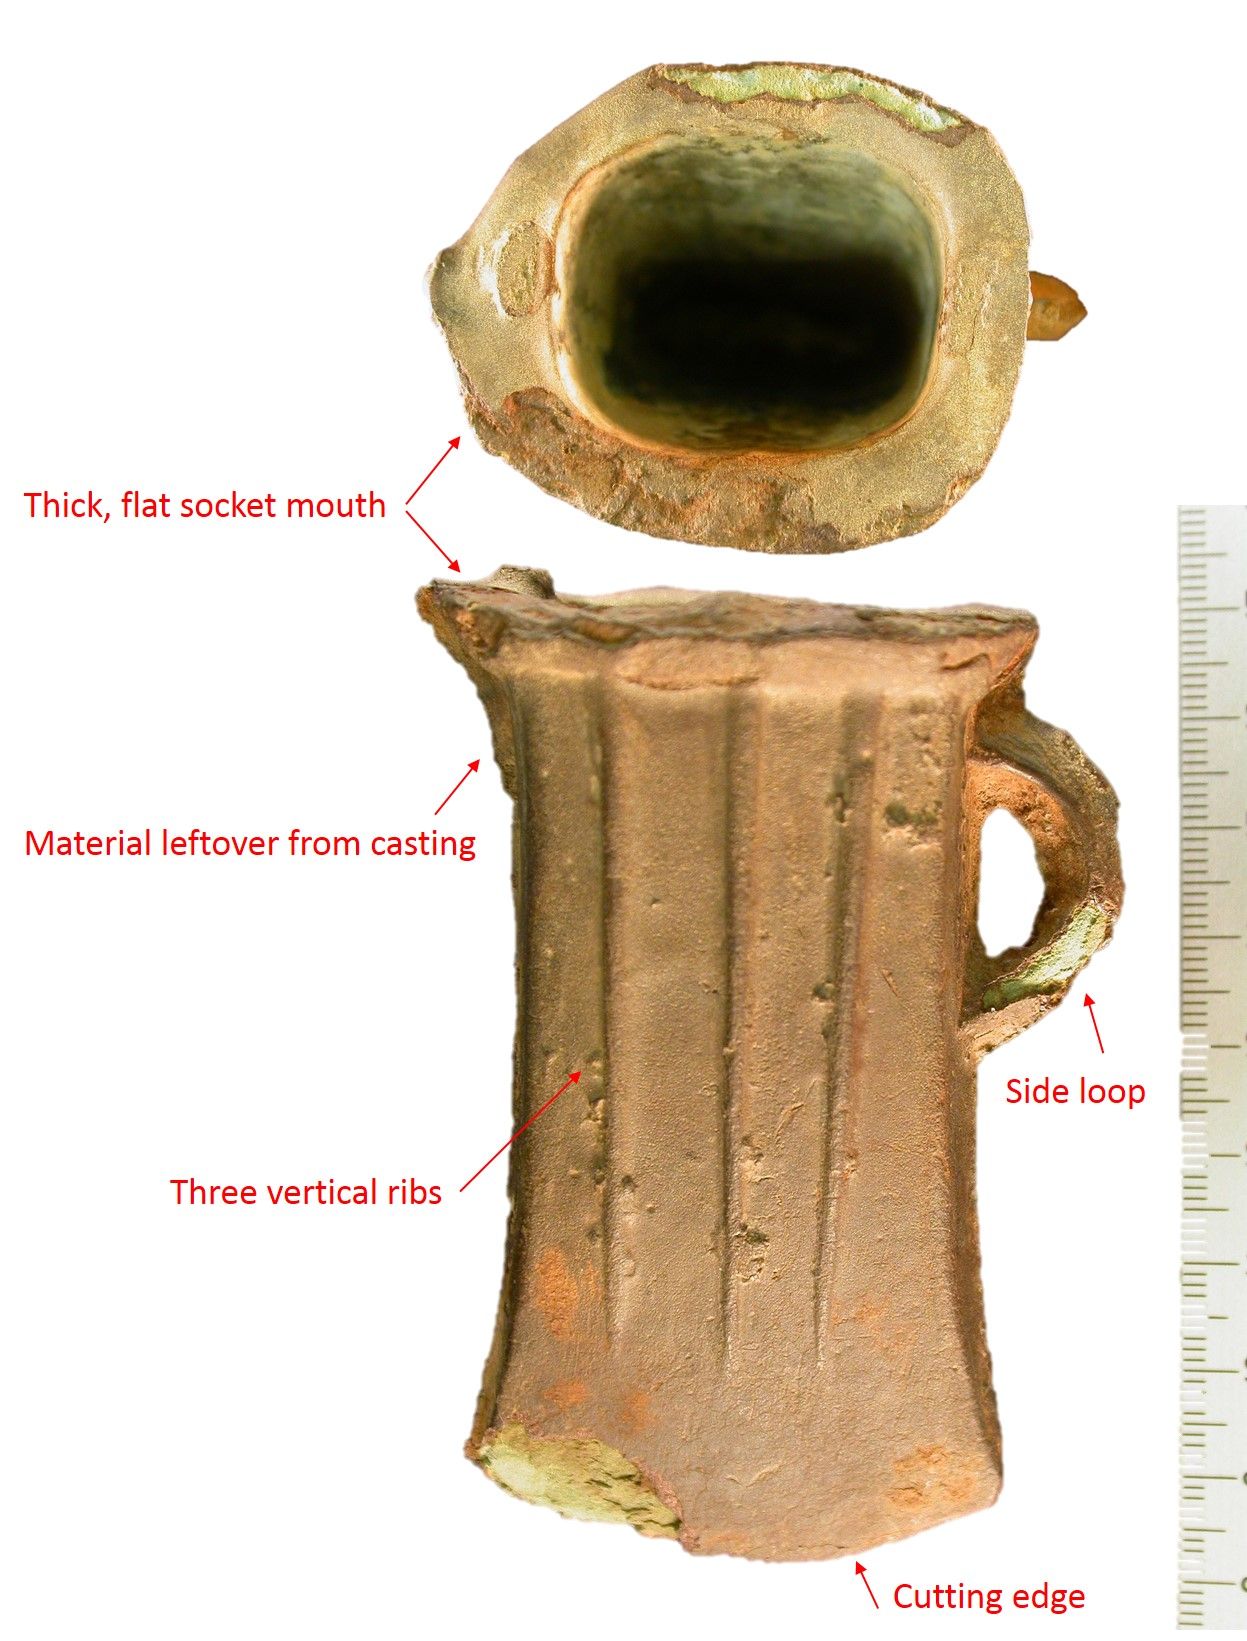 Terminology for different parts of a South Wales socketed axe (courtesy of the Portable Antiquities Scheme)